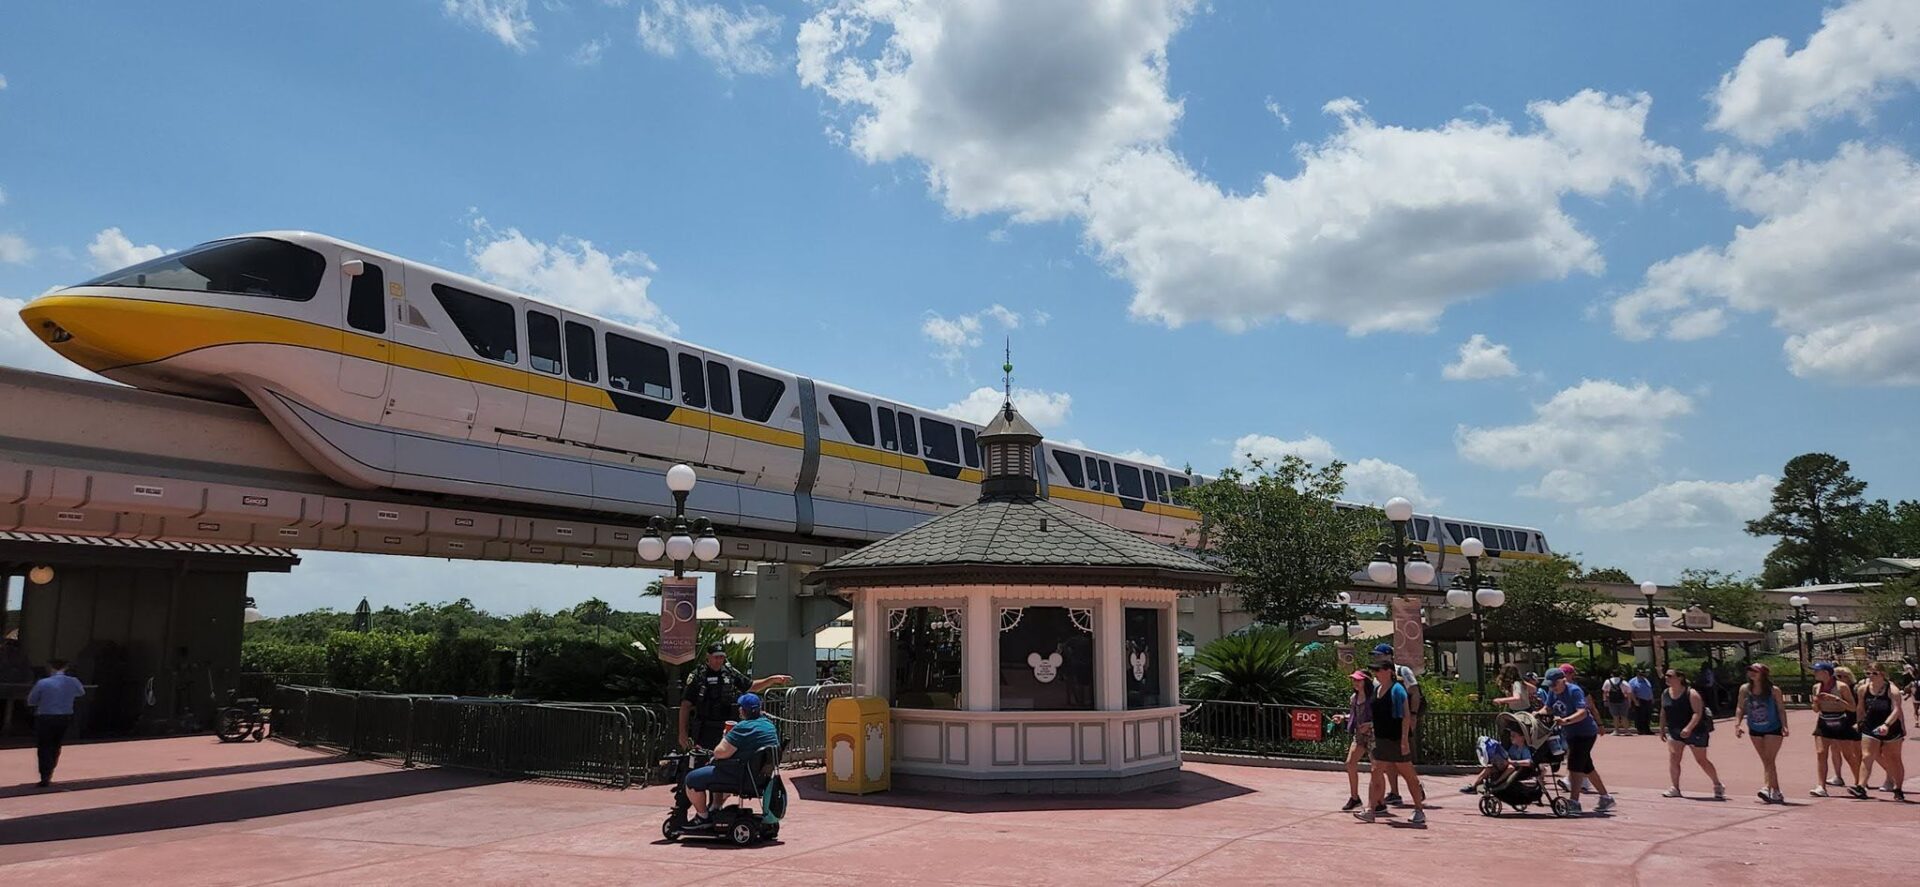 Florida Governor Ron DeSantis Enacts Bill Requiring State Inspections of Walt Disney World Monorails